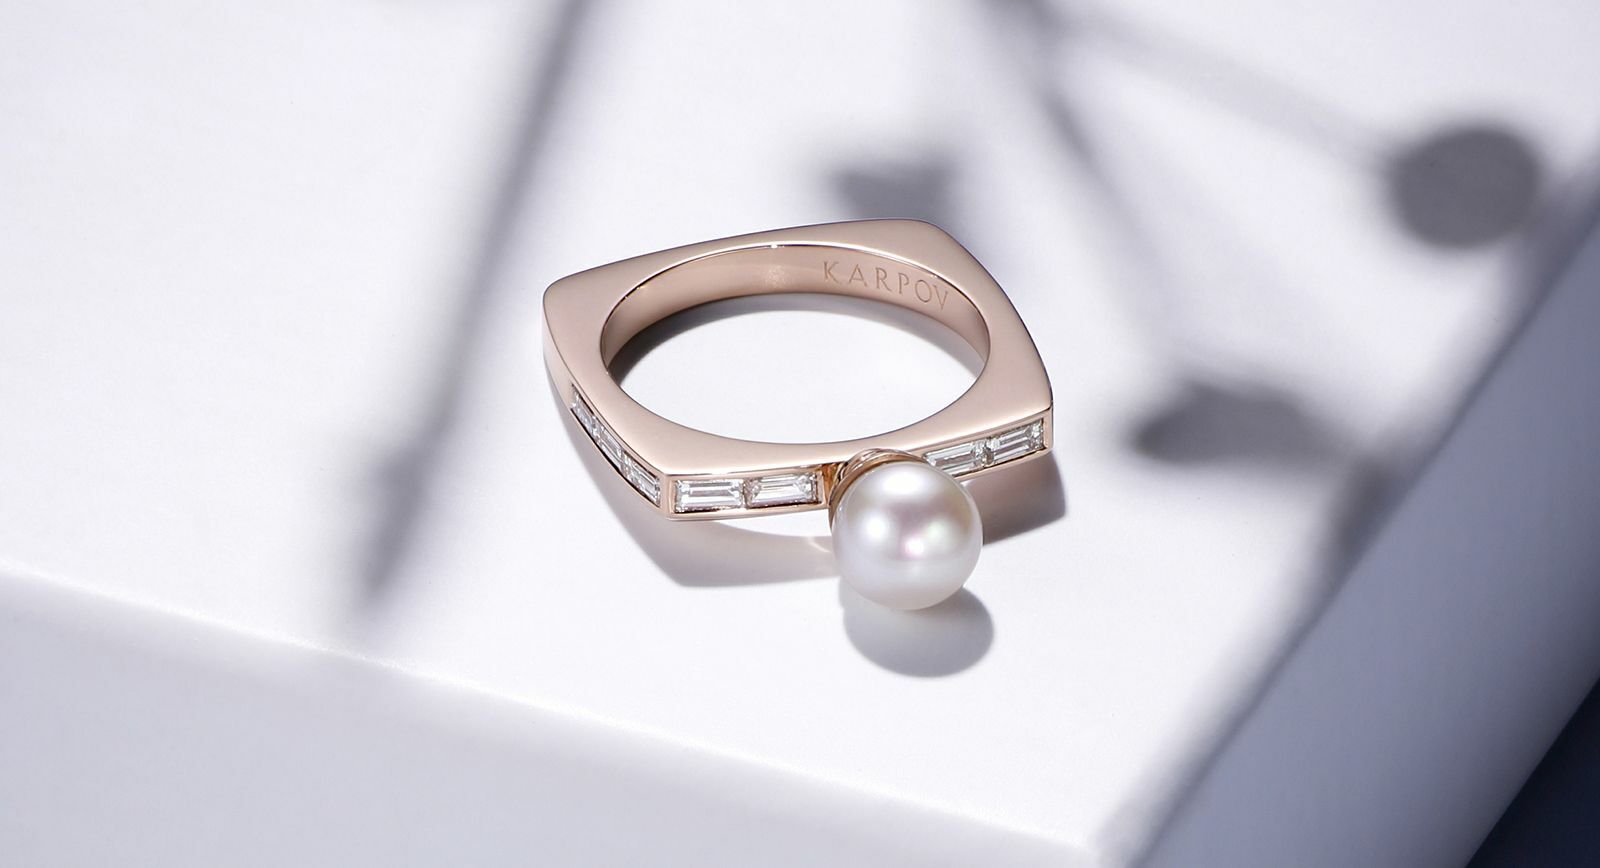 Karpov ring with baguette diamonds and pearl in rose gold